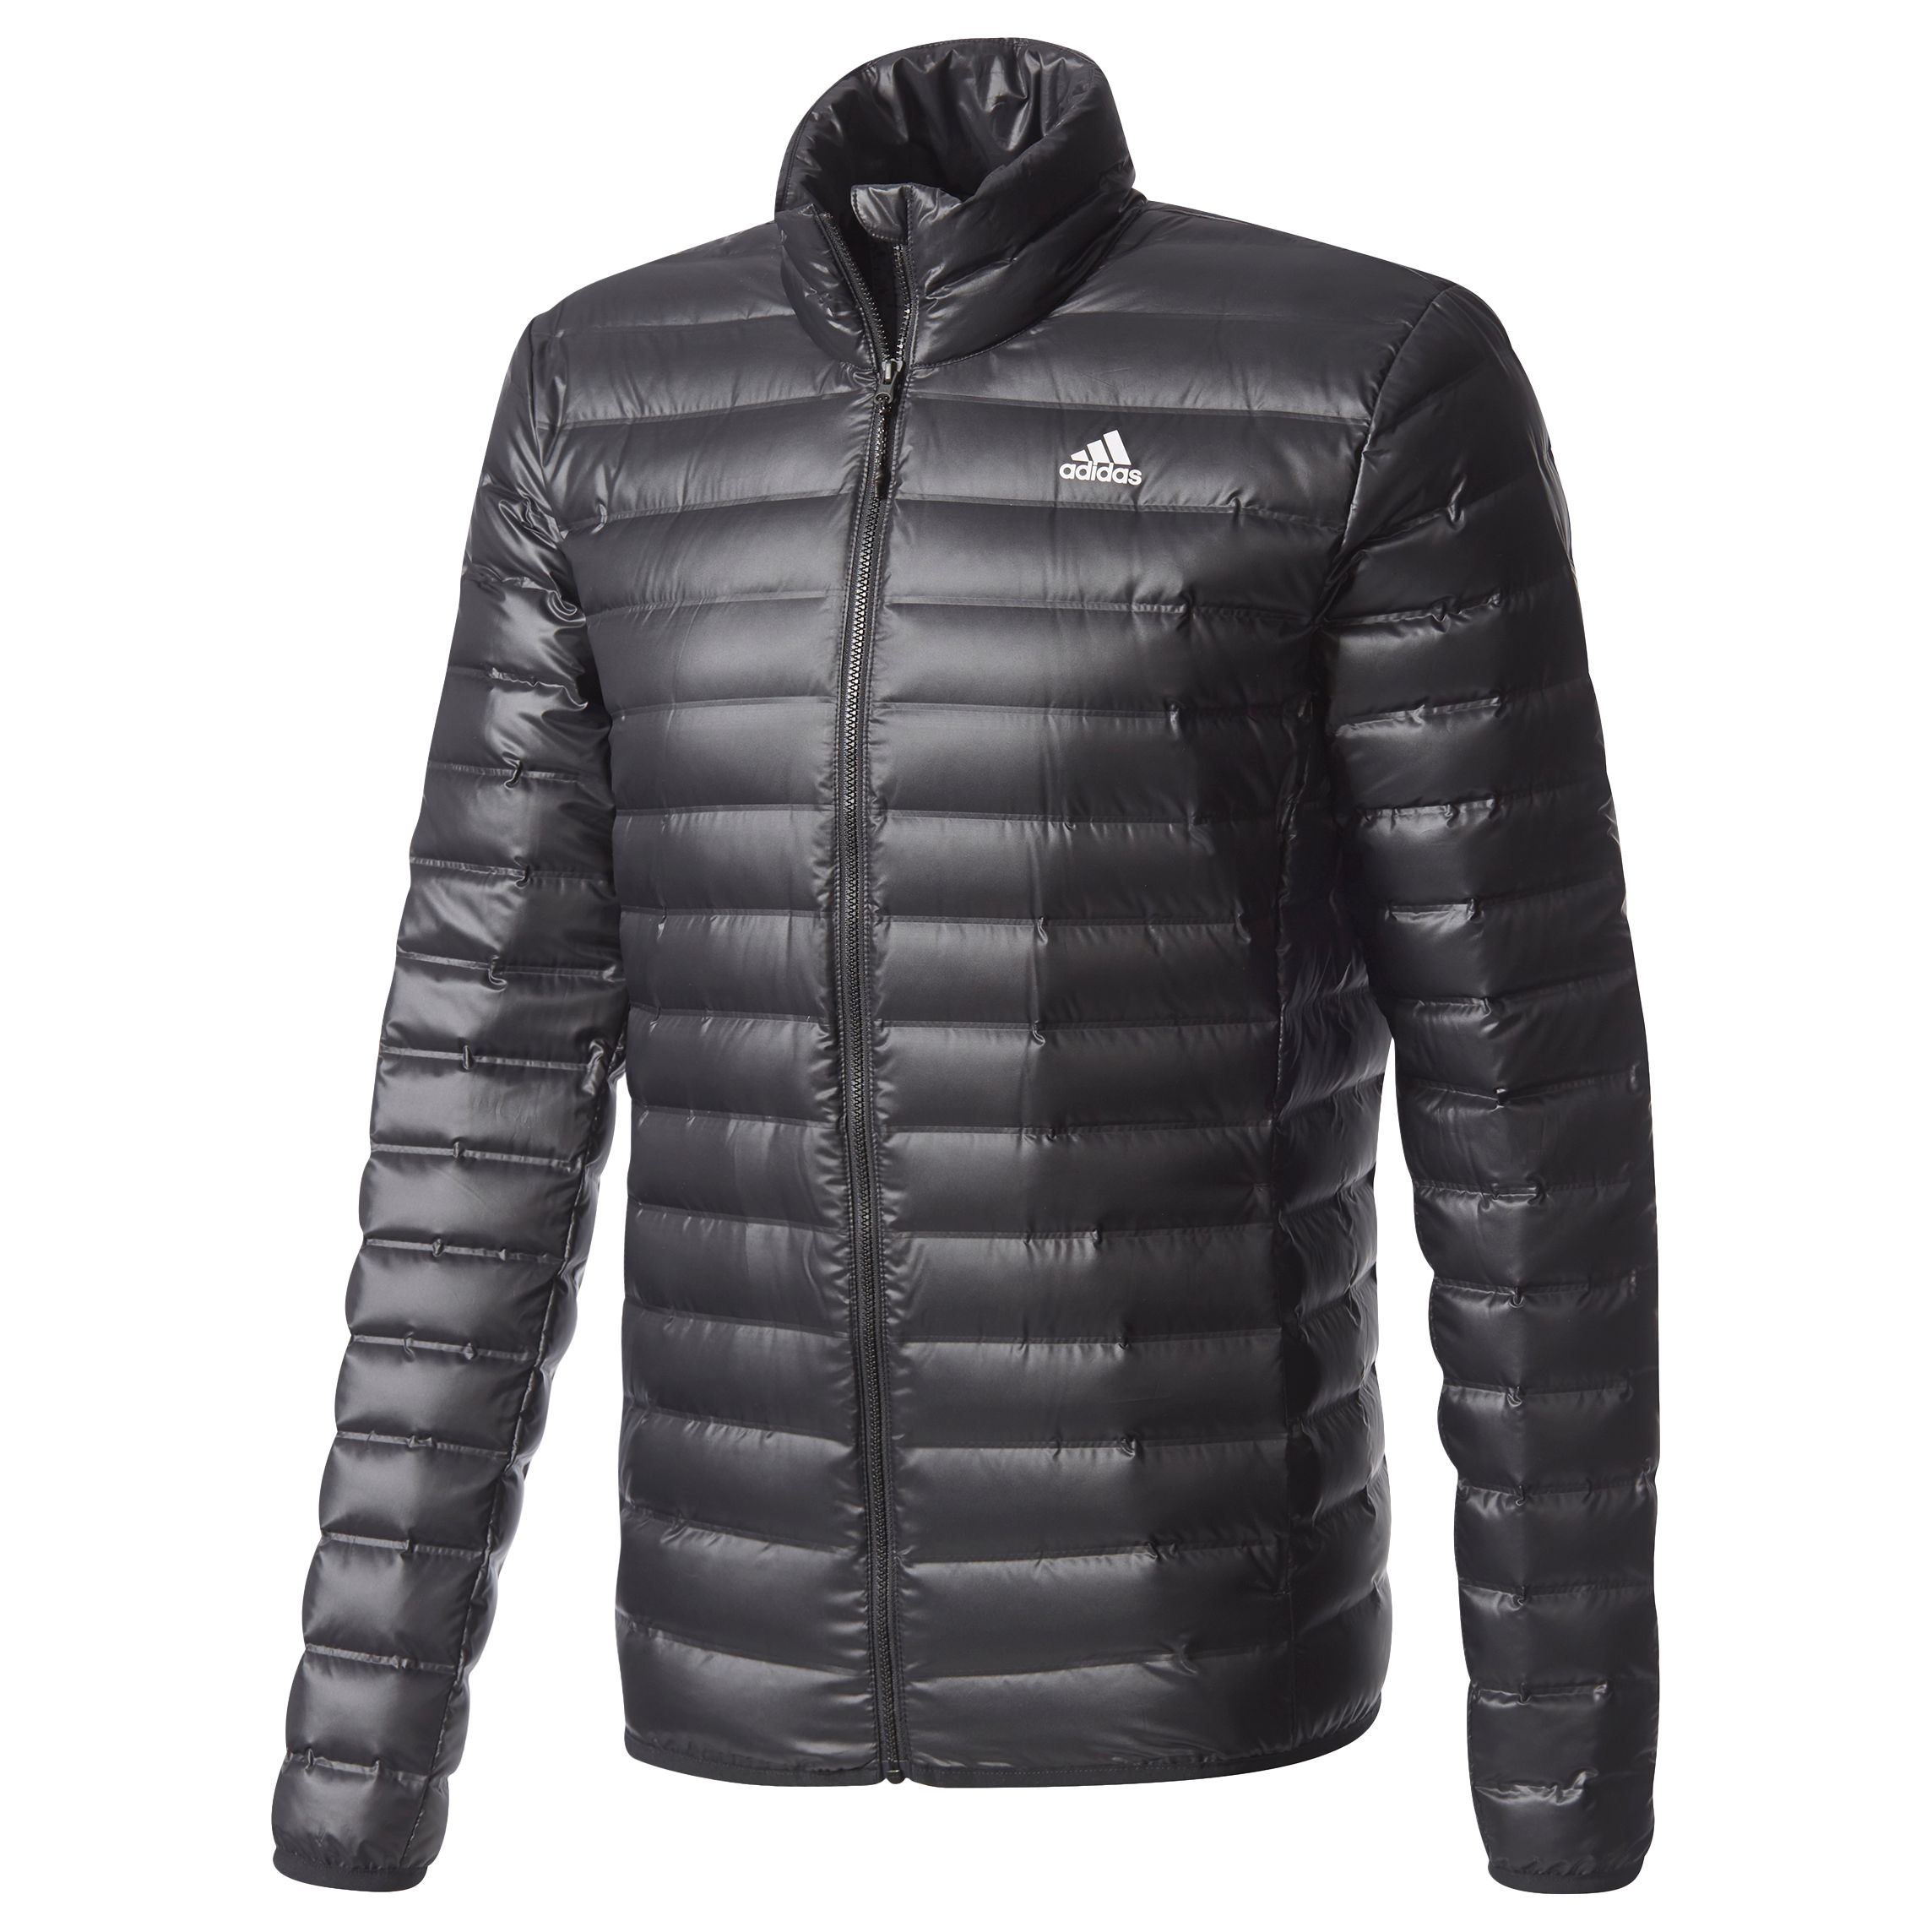 adidas quilted jacket black